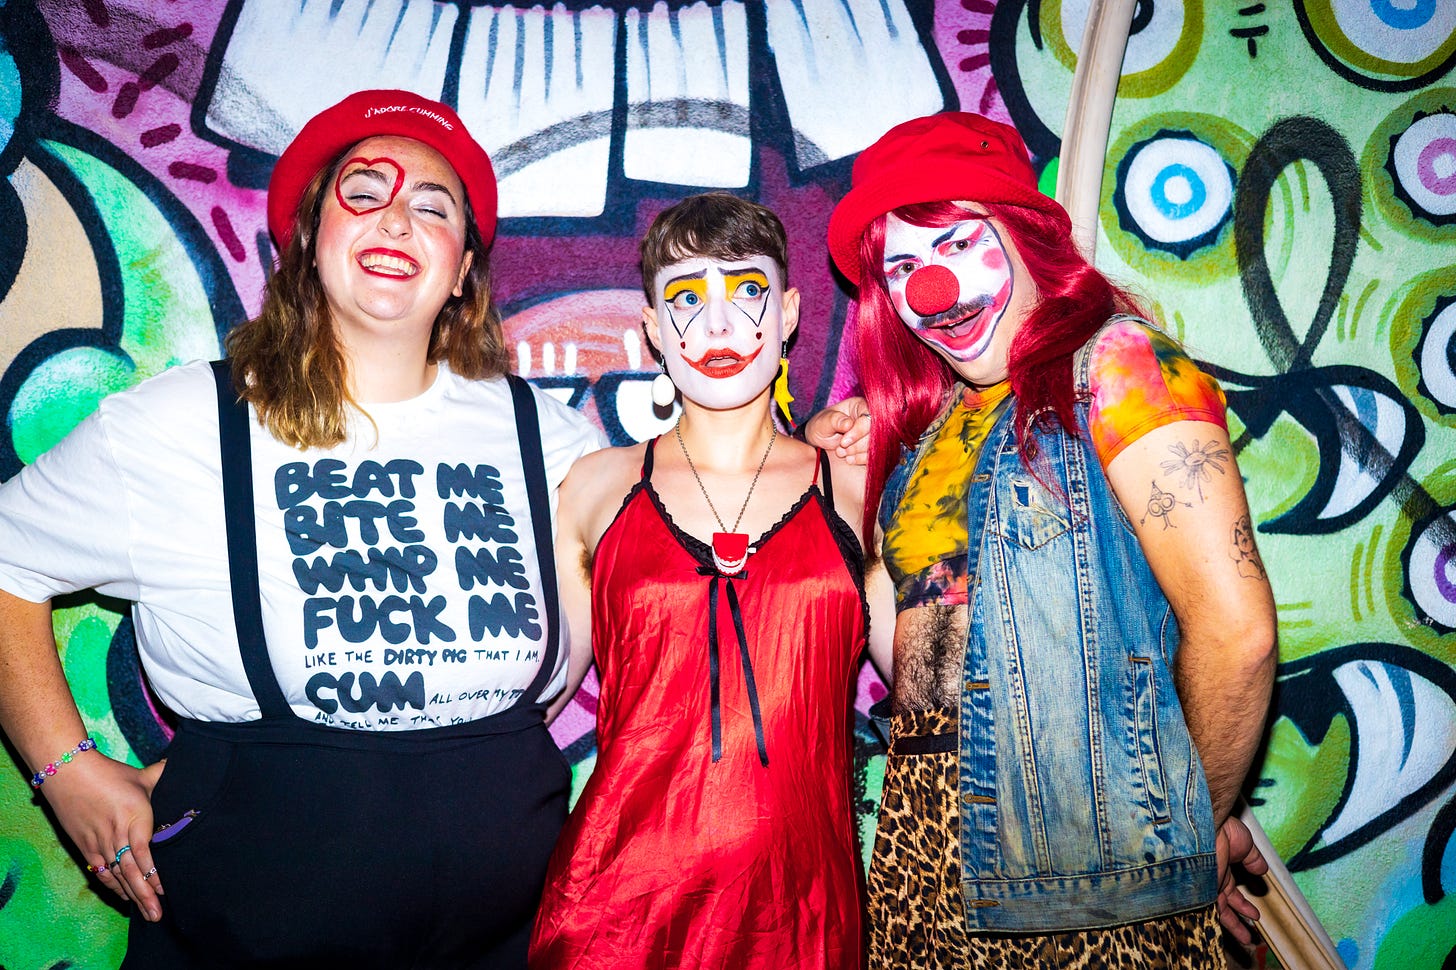 L-R: Caty, Cass, and Babz pose in clown outfits and makeup against a colorful graffiti wall